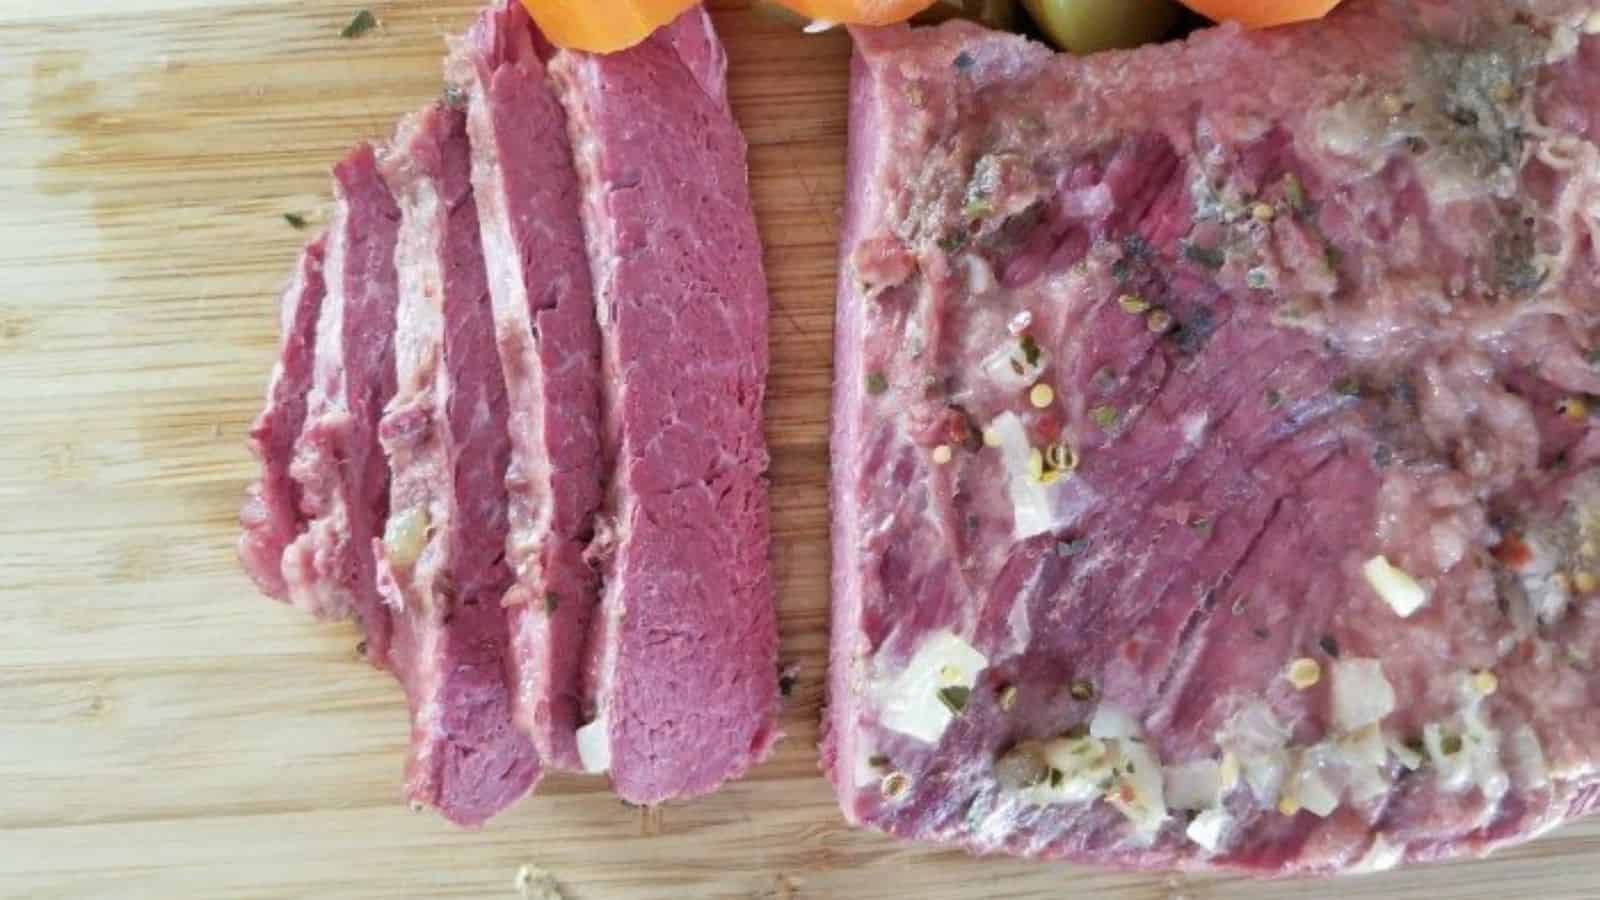 Image shows  Corned beef and veggies on a cutting board.